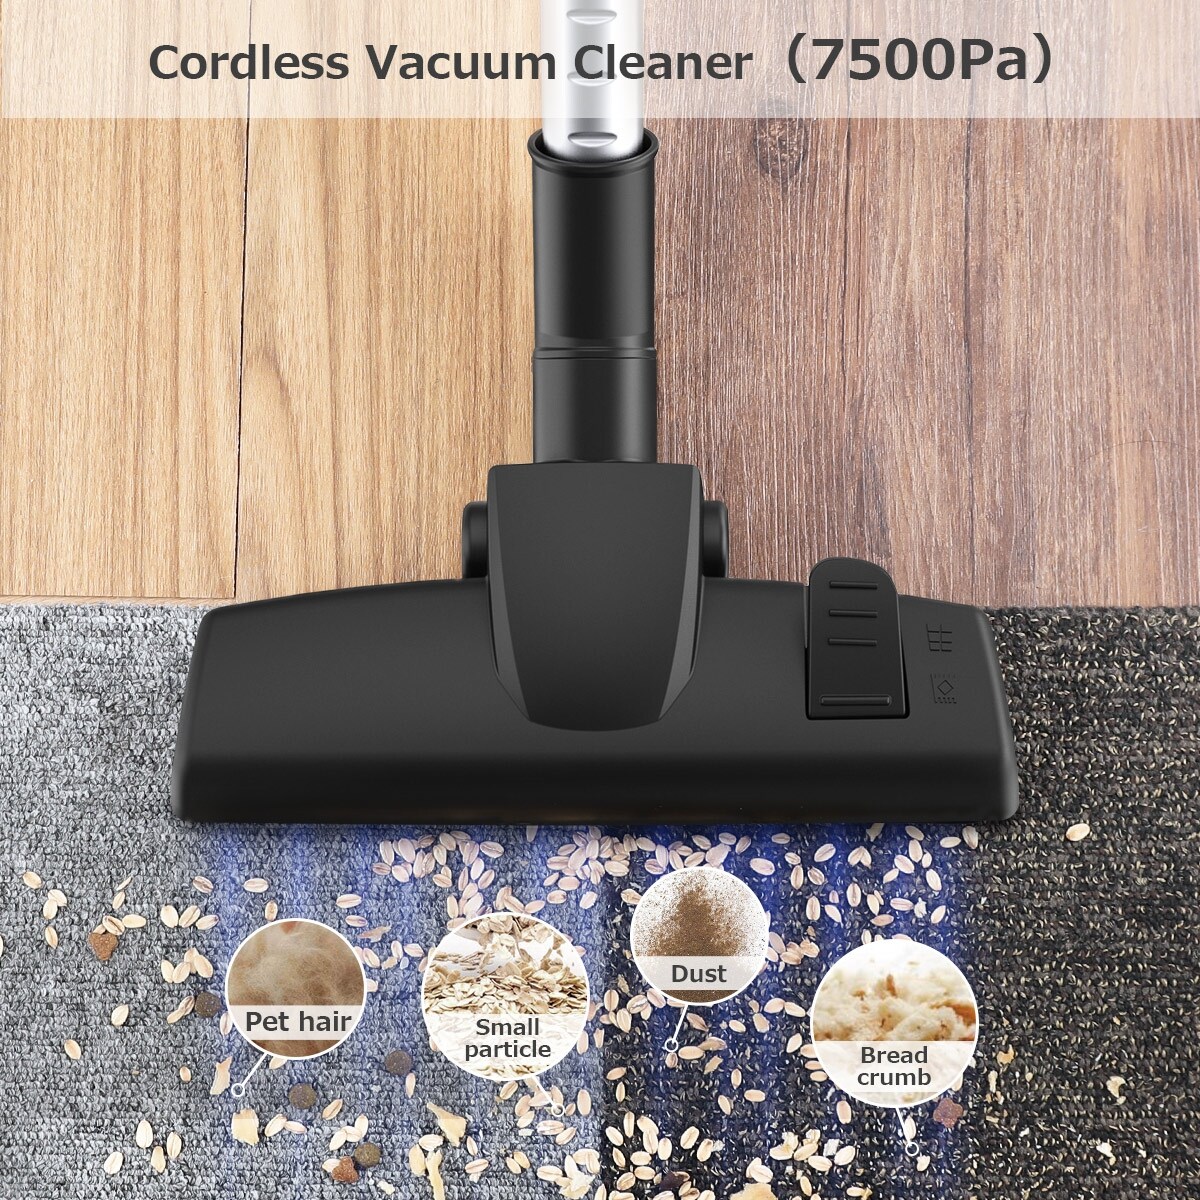 ZIGLINT Z3 Portable Cordless Rechargeable Handheld Vacuum Cleaner Dust  Cleaner 120W - Bed Bath & Beyond - 28792806